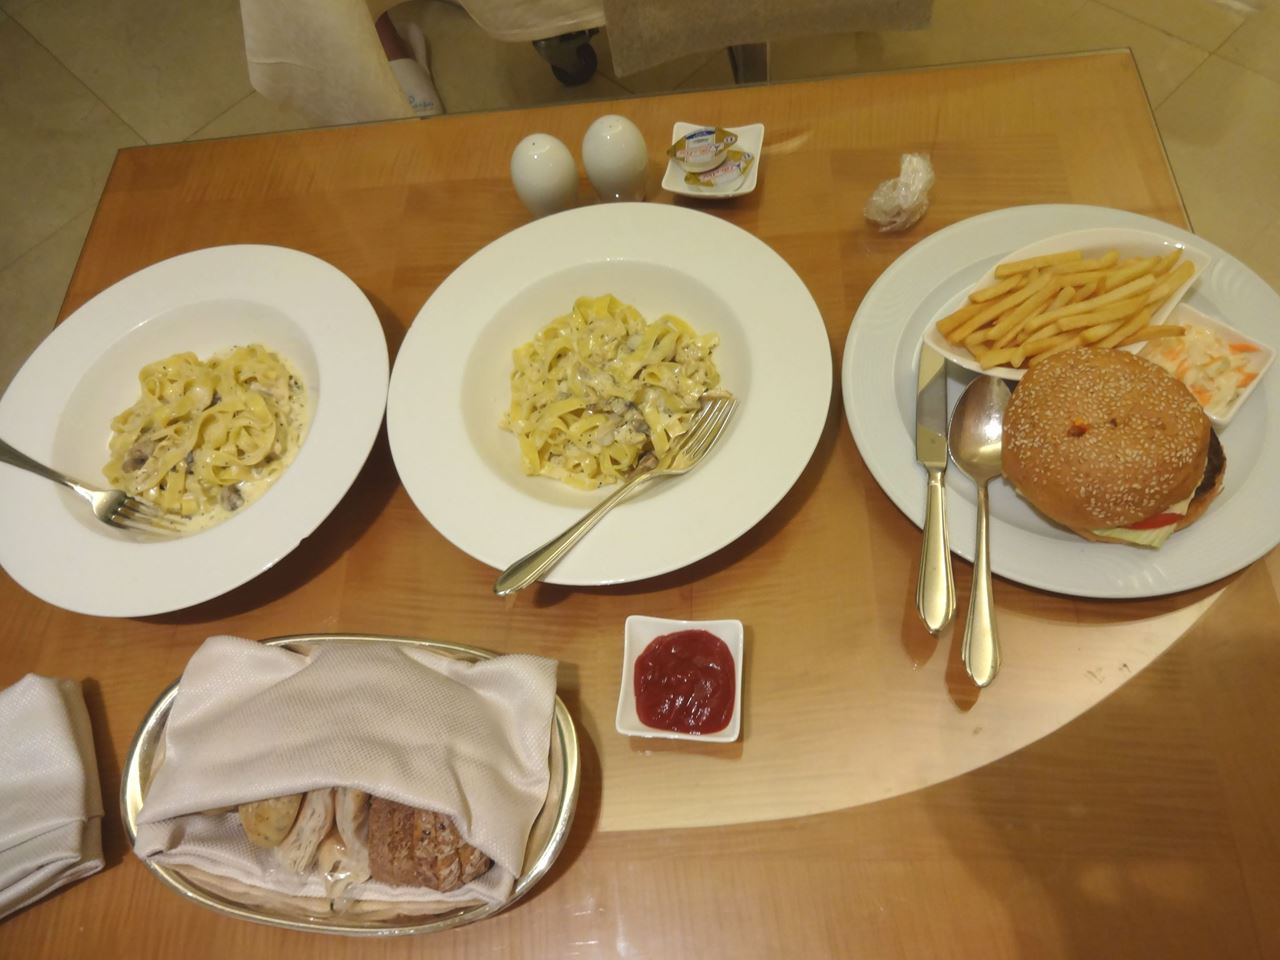 Dinner from the room service menu in Marina Hotel